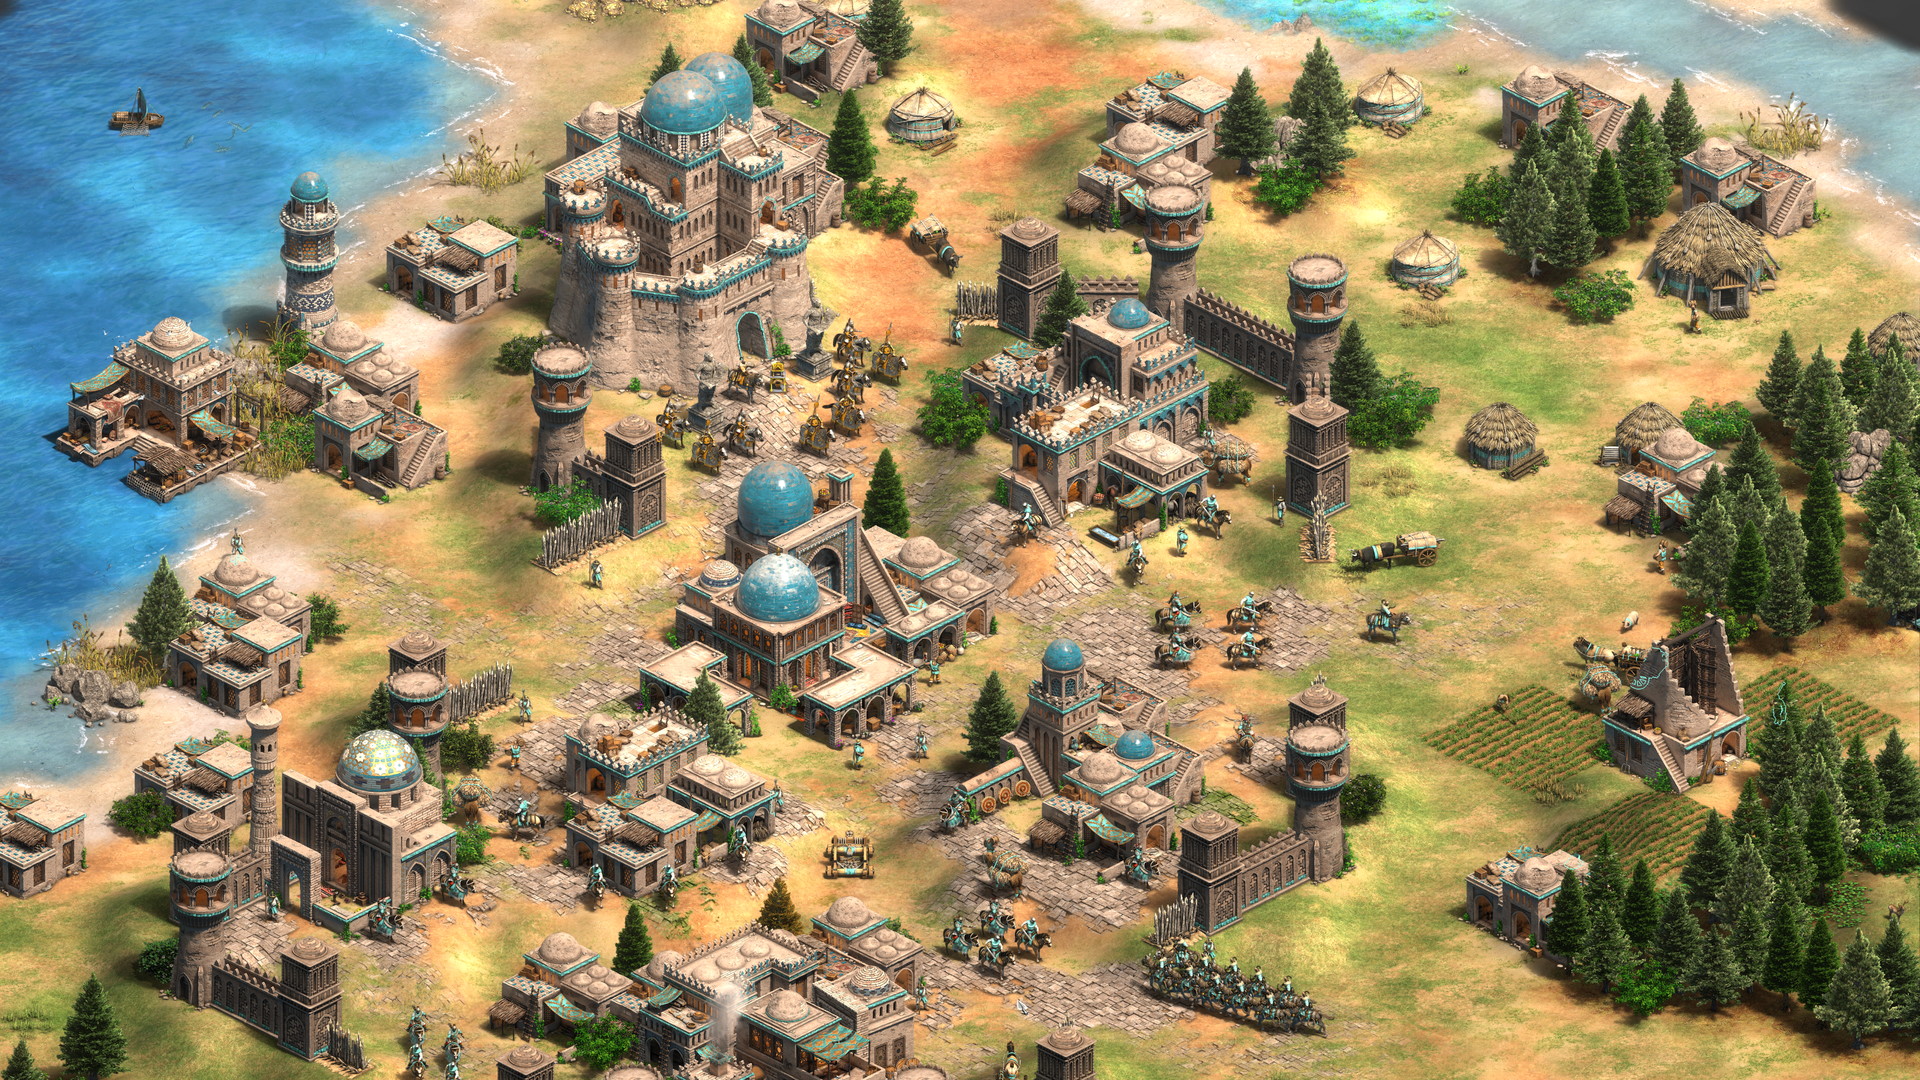 Age of Empires II: Definitive Edition - screenshot 12